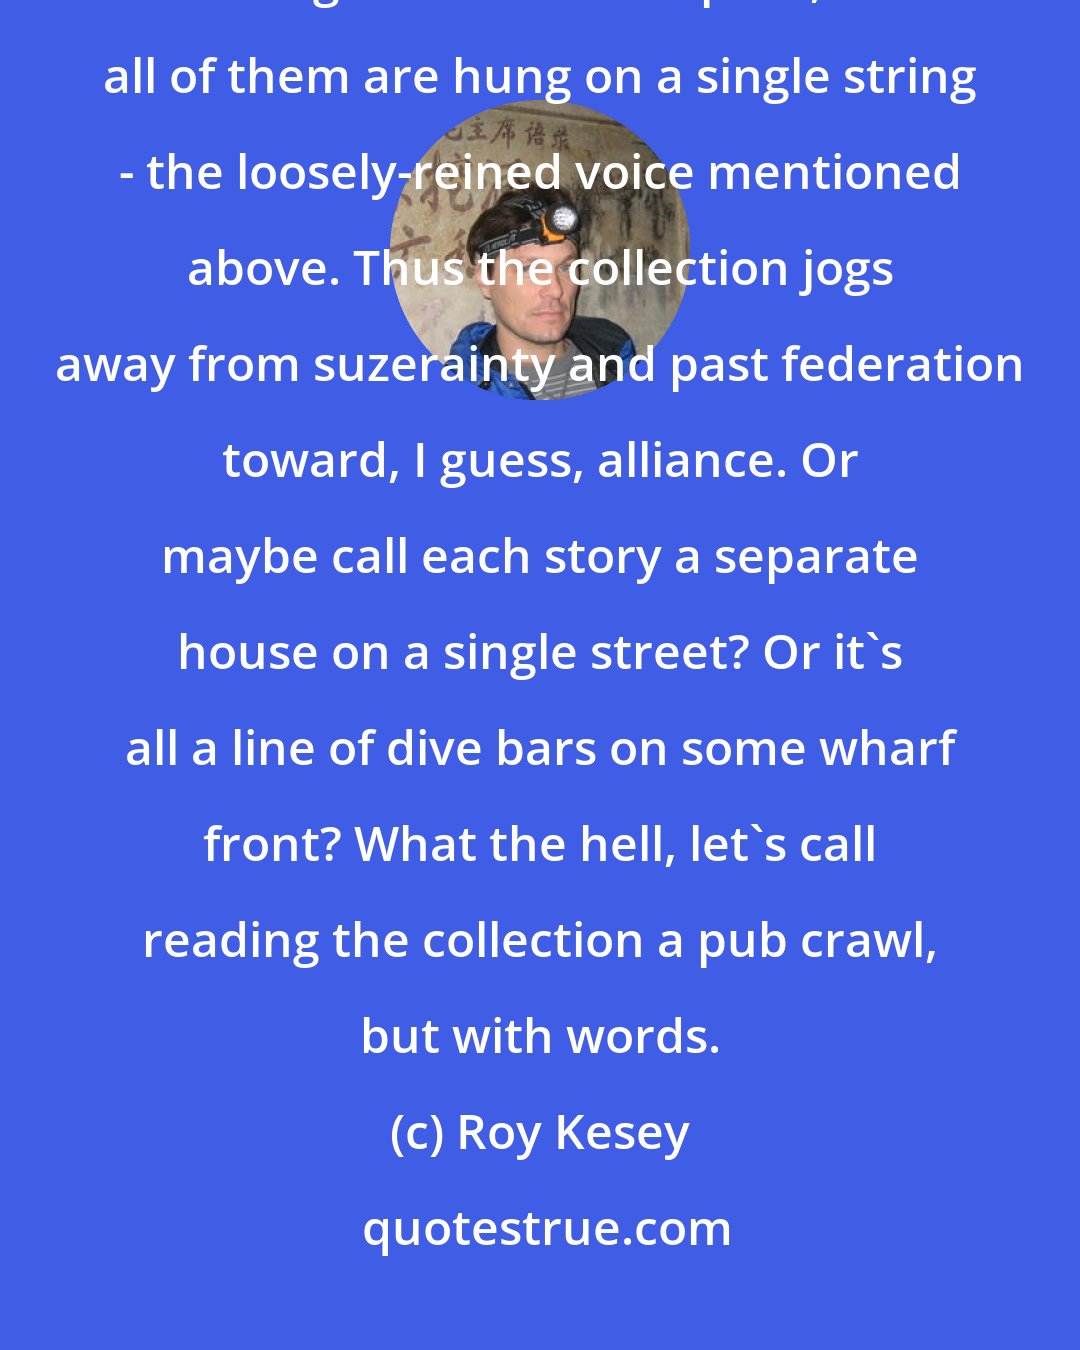 Roy Kesey: What I like about organizing things that way is that each story gets nearly full reign over its own space, but all of them are hung on a single string - the loosely-reined voice mentioned above. Thus the collection jogs away from suzerainty and past federation toward, I guess, alliance. Or maybe call each story a separate house on a single street? Or it's all a line of dive bars on some wharf front? What the hell, let's call reading the collection a pub crawl, but with words.